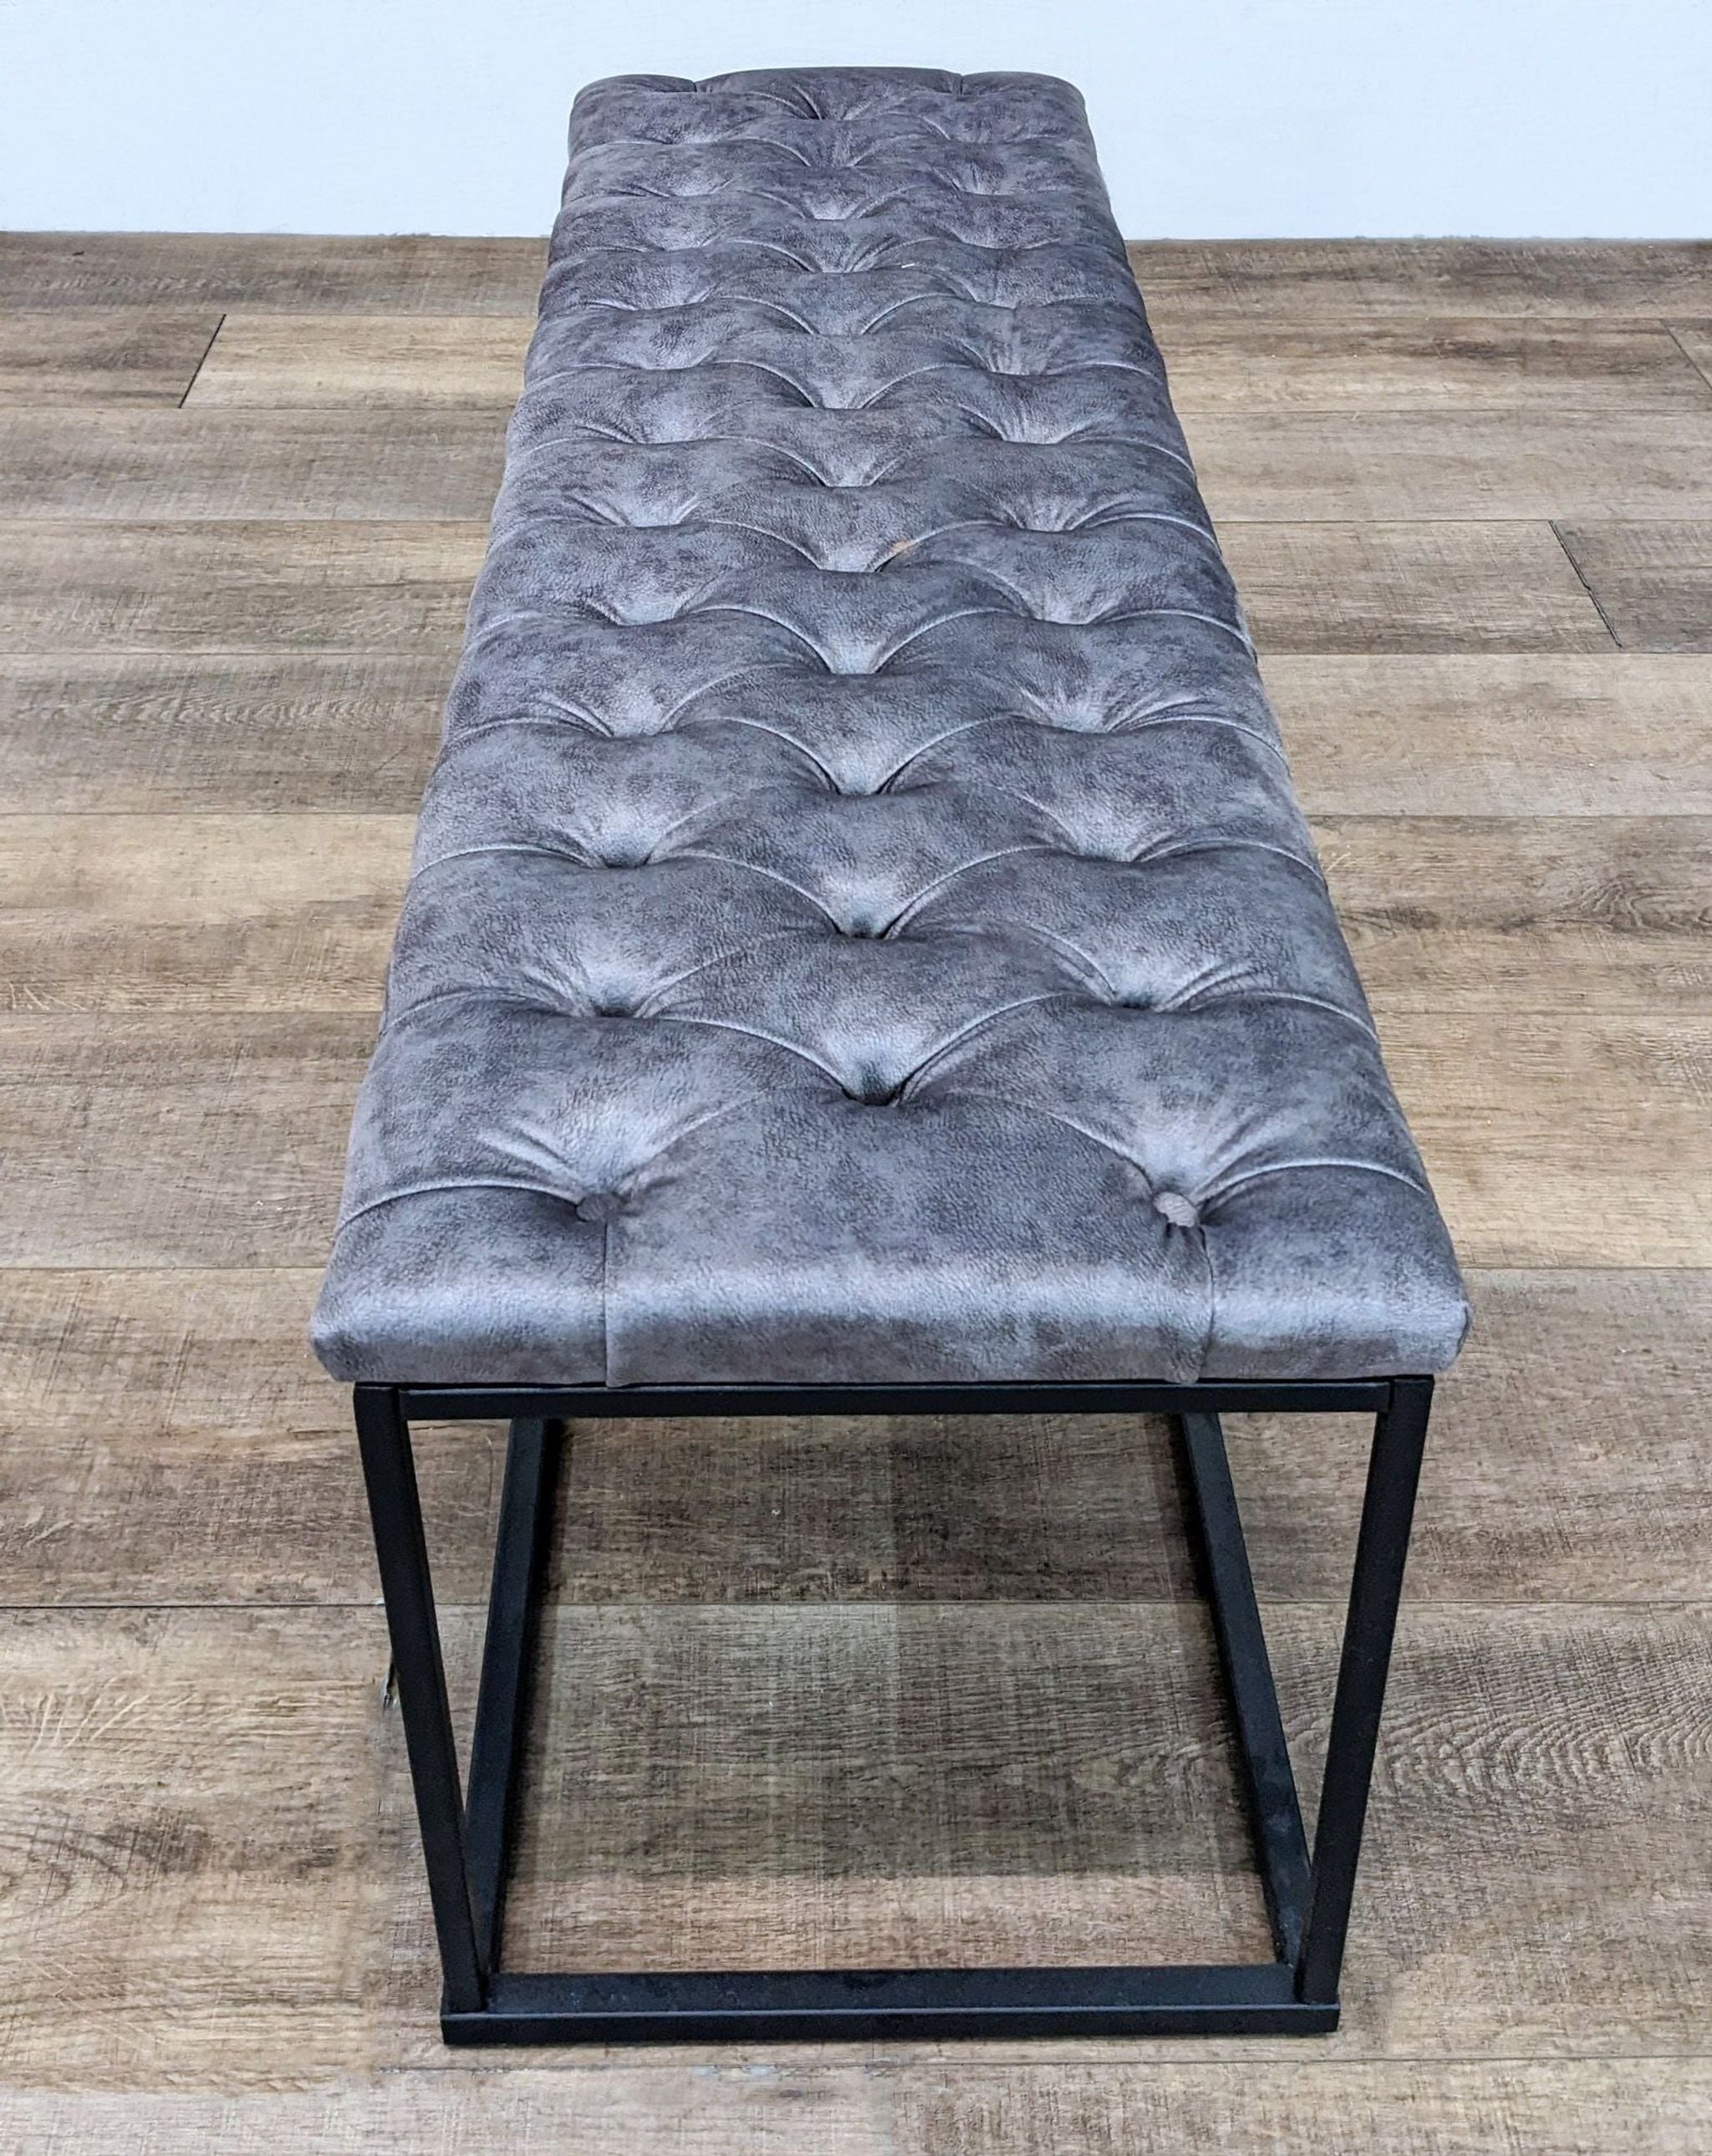 Reperch Padded Tufted Top Leather 52" Bench with Dark Metal Frame on wooden floor.